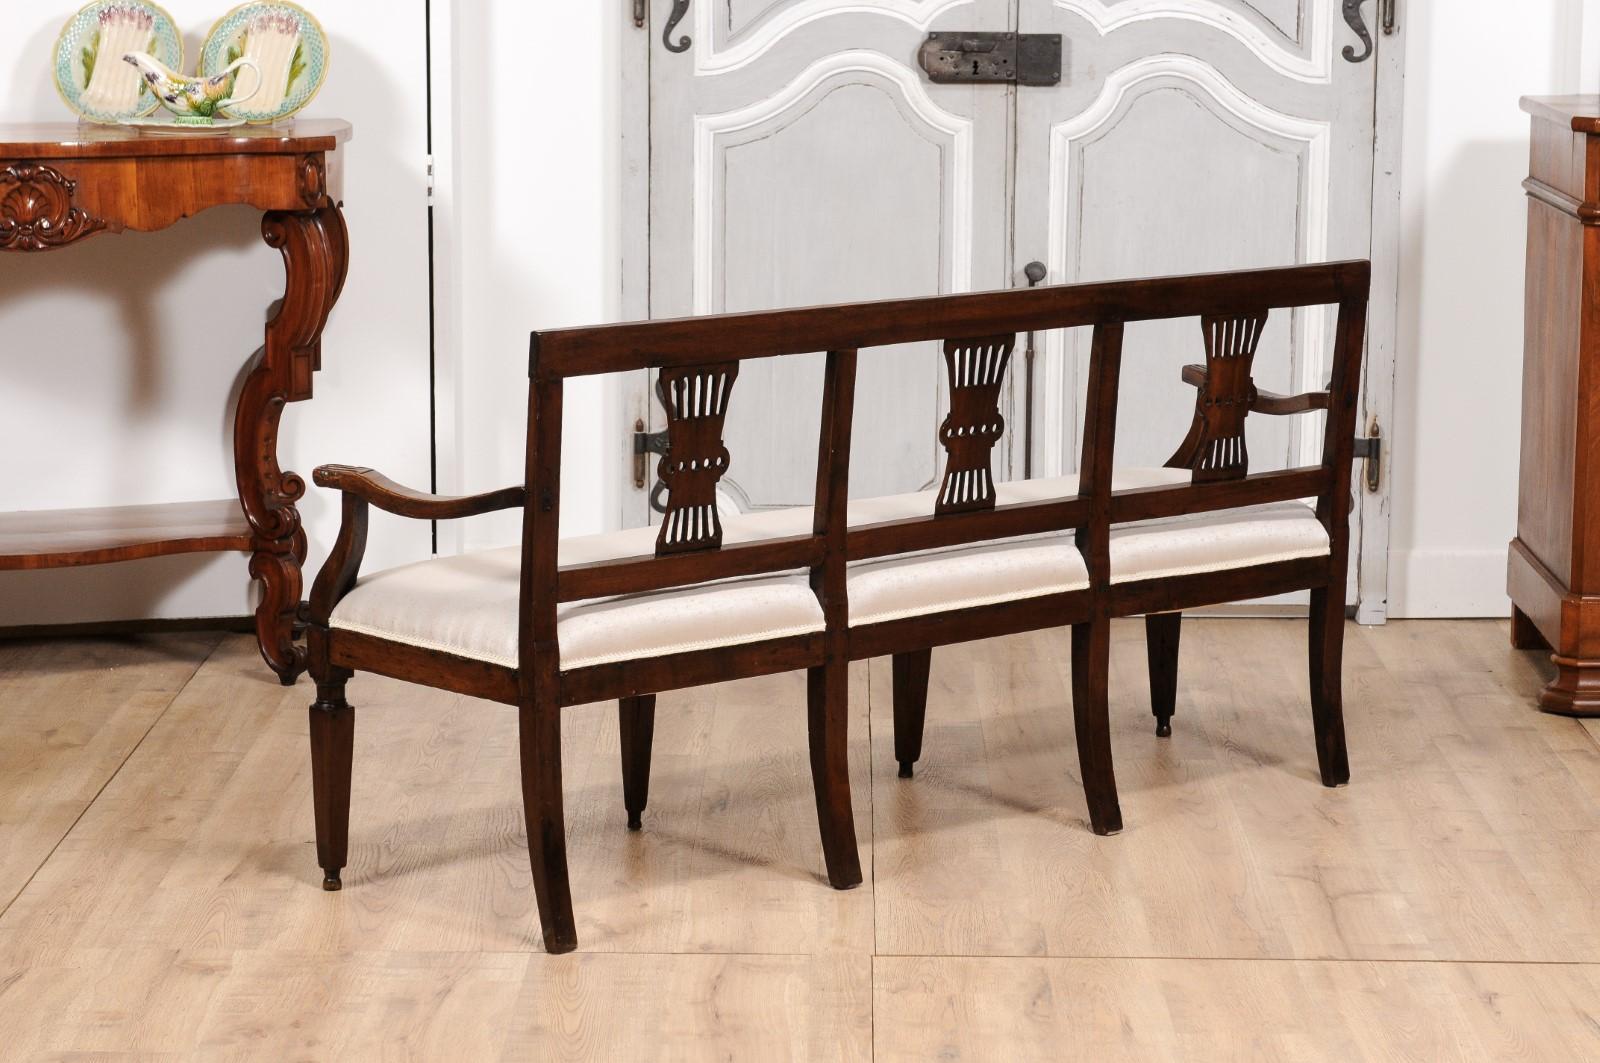 Italian 19th Century Walnut Three-Seater Bench with Carved Splats and Upholstery For Sale 5